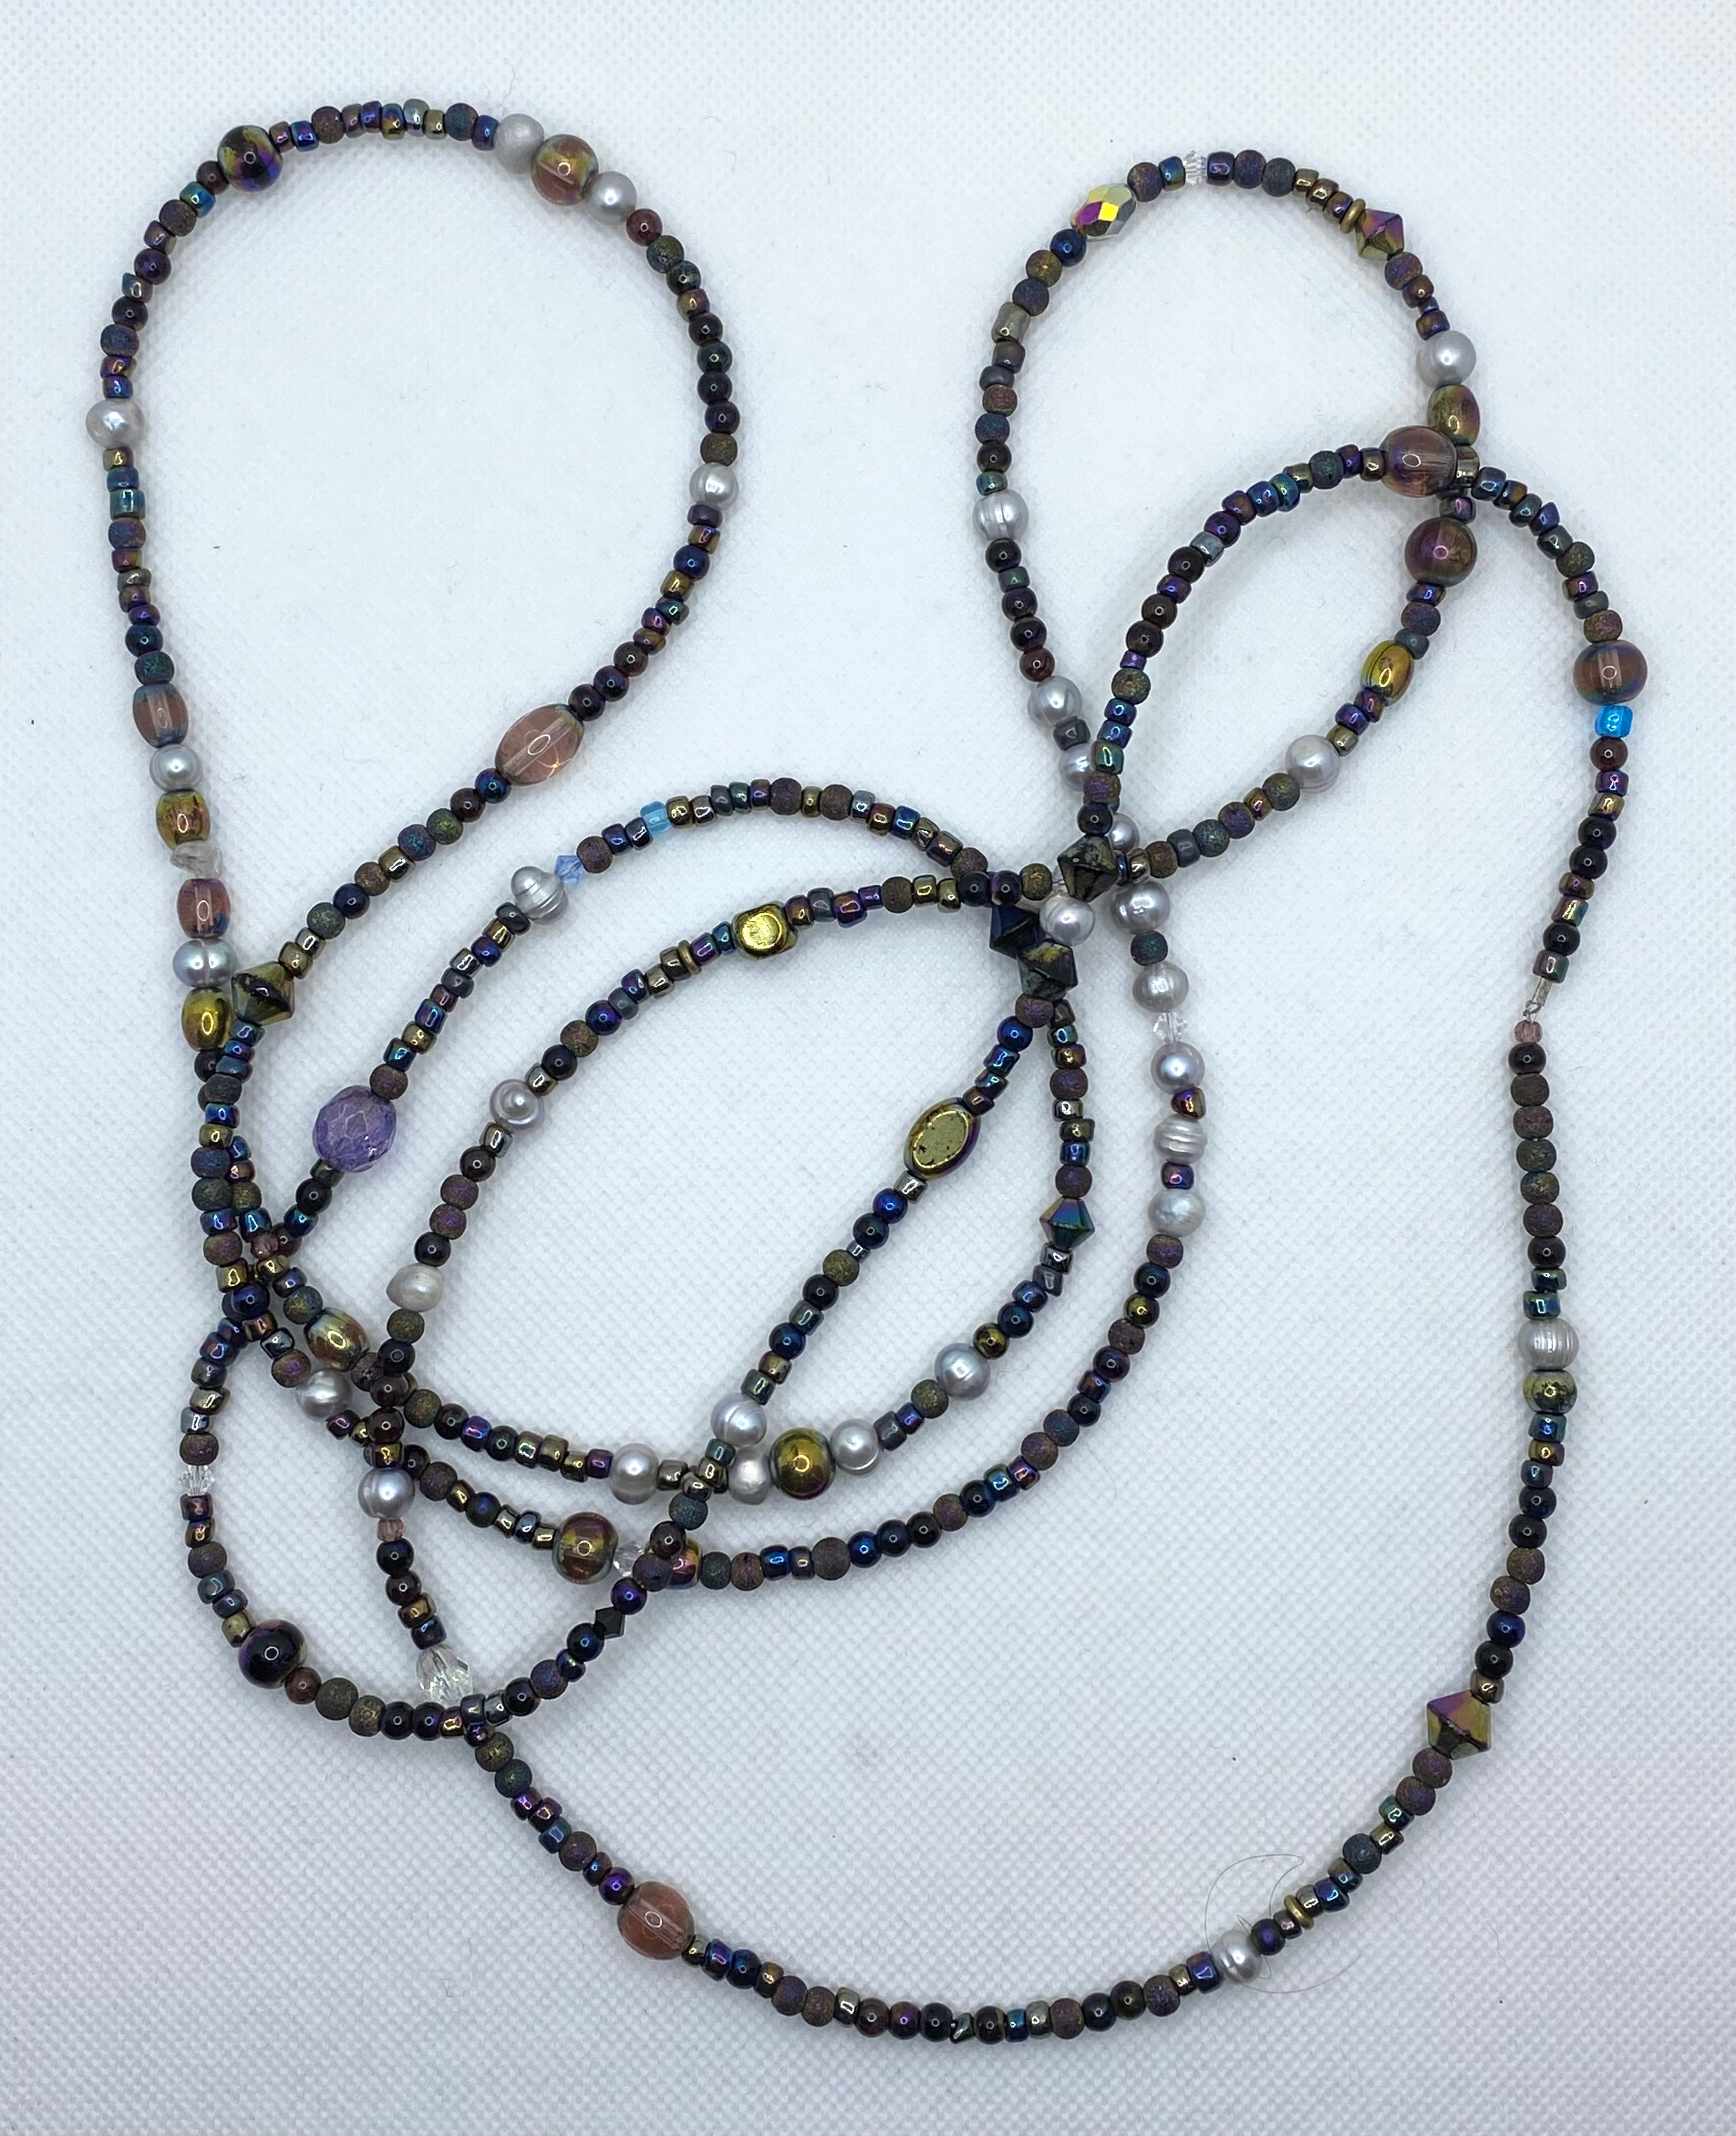 Brown, Black and Pearl Handmade Extra Long Necklace